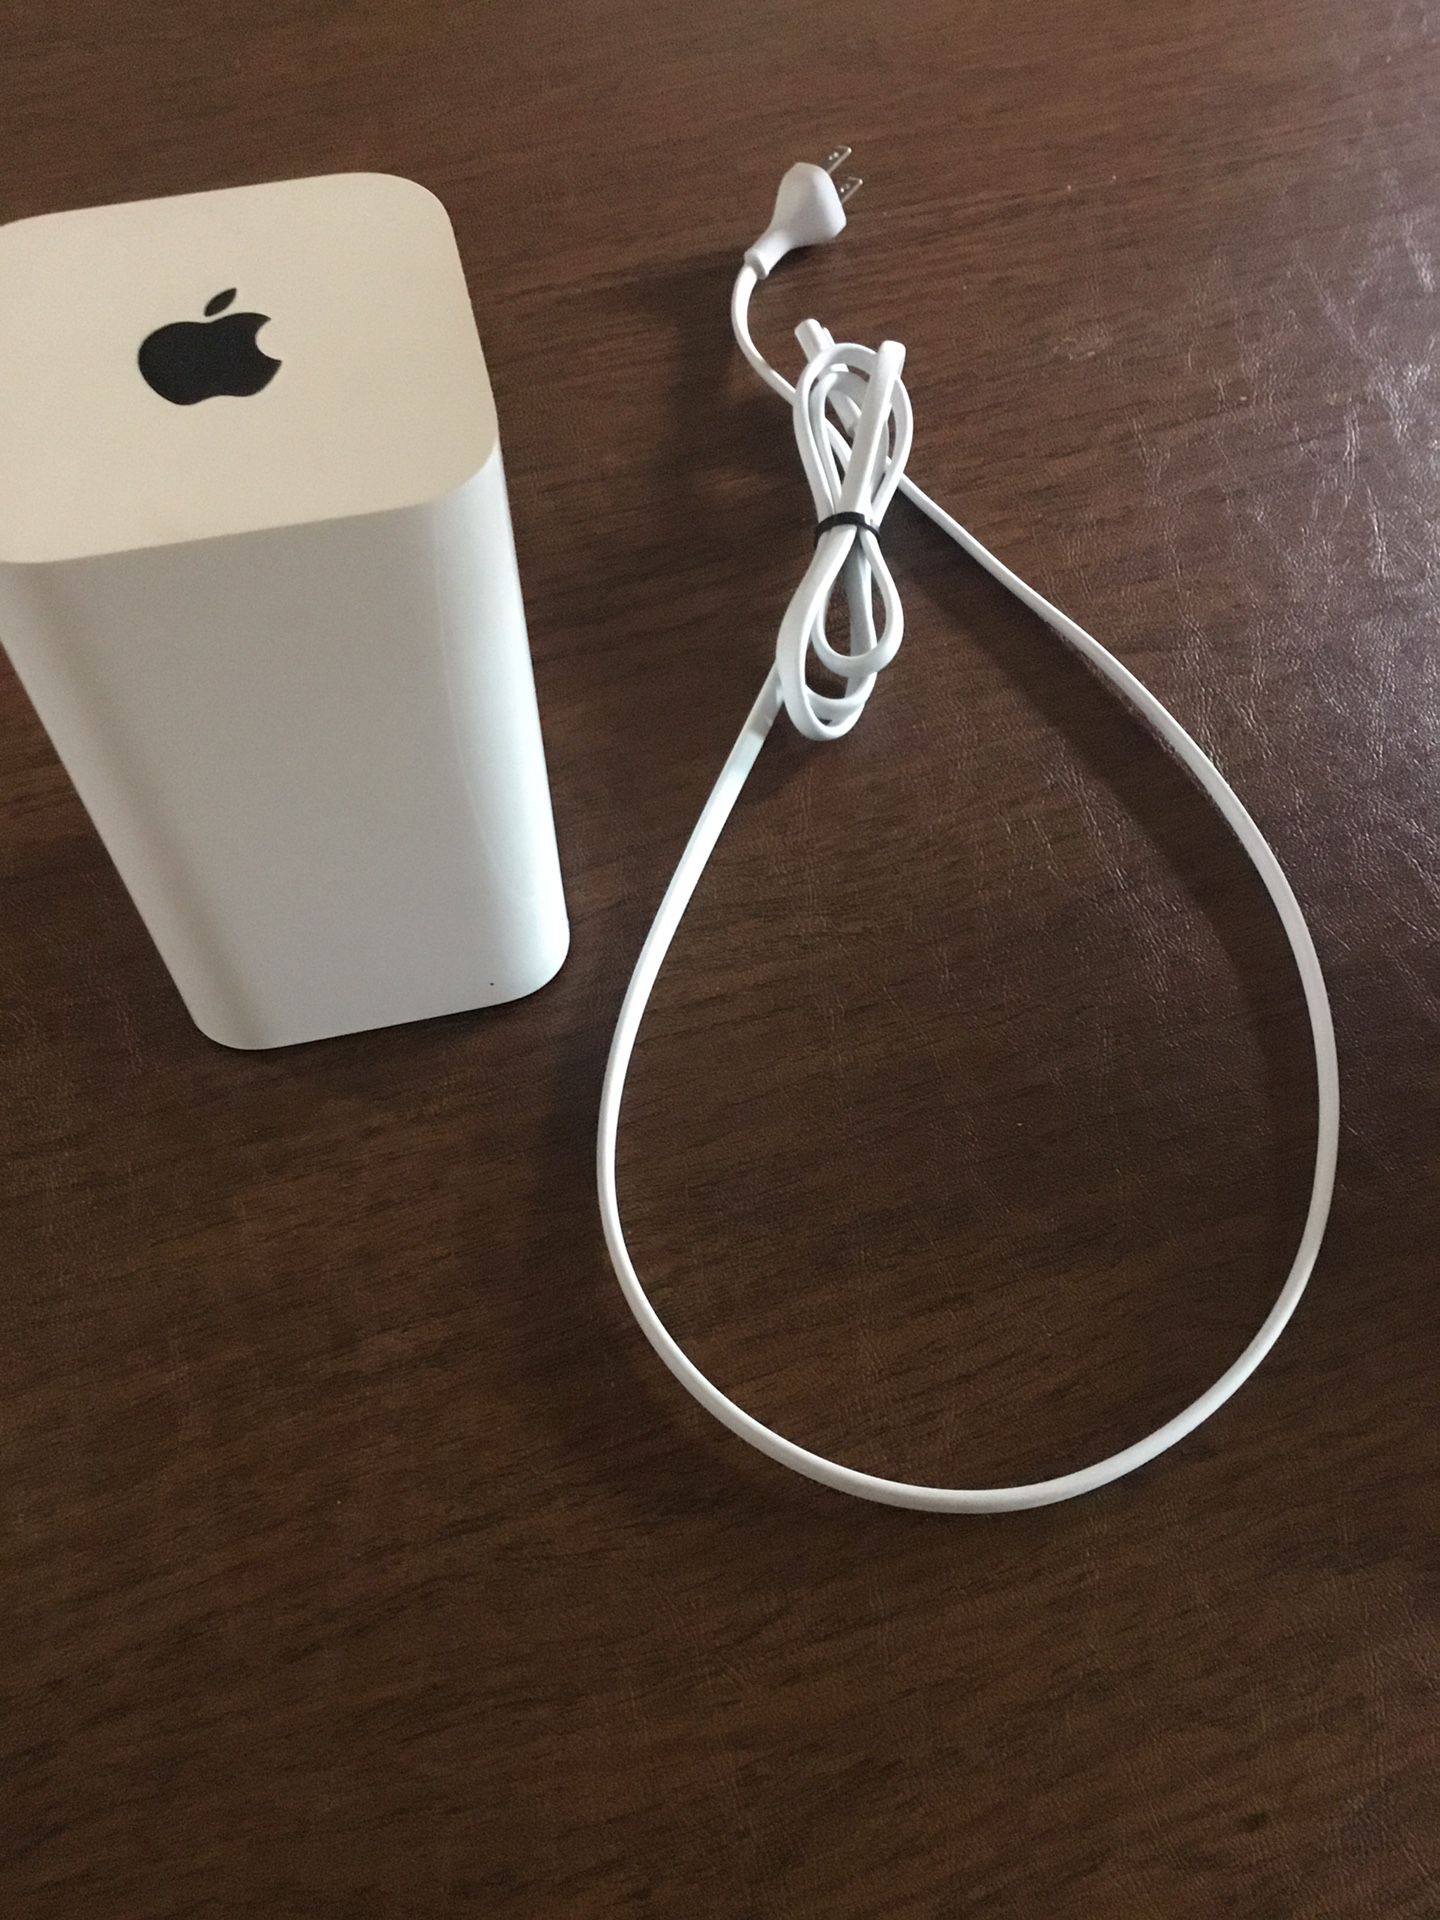 Apple Extreme AirPort Router